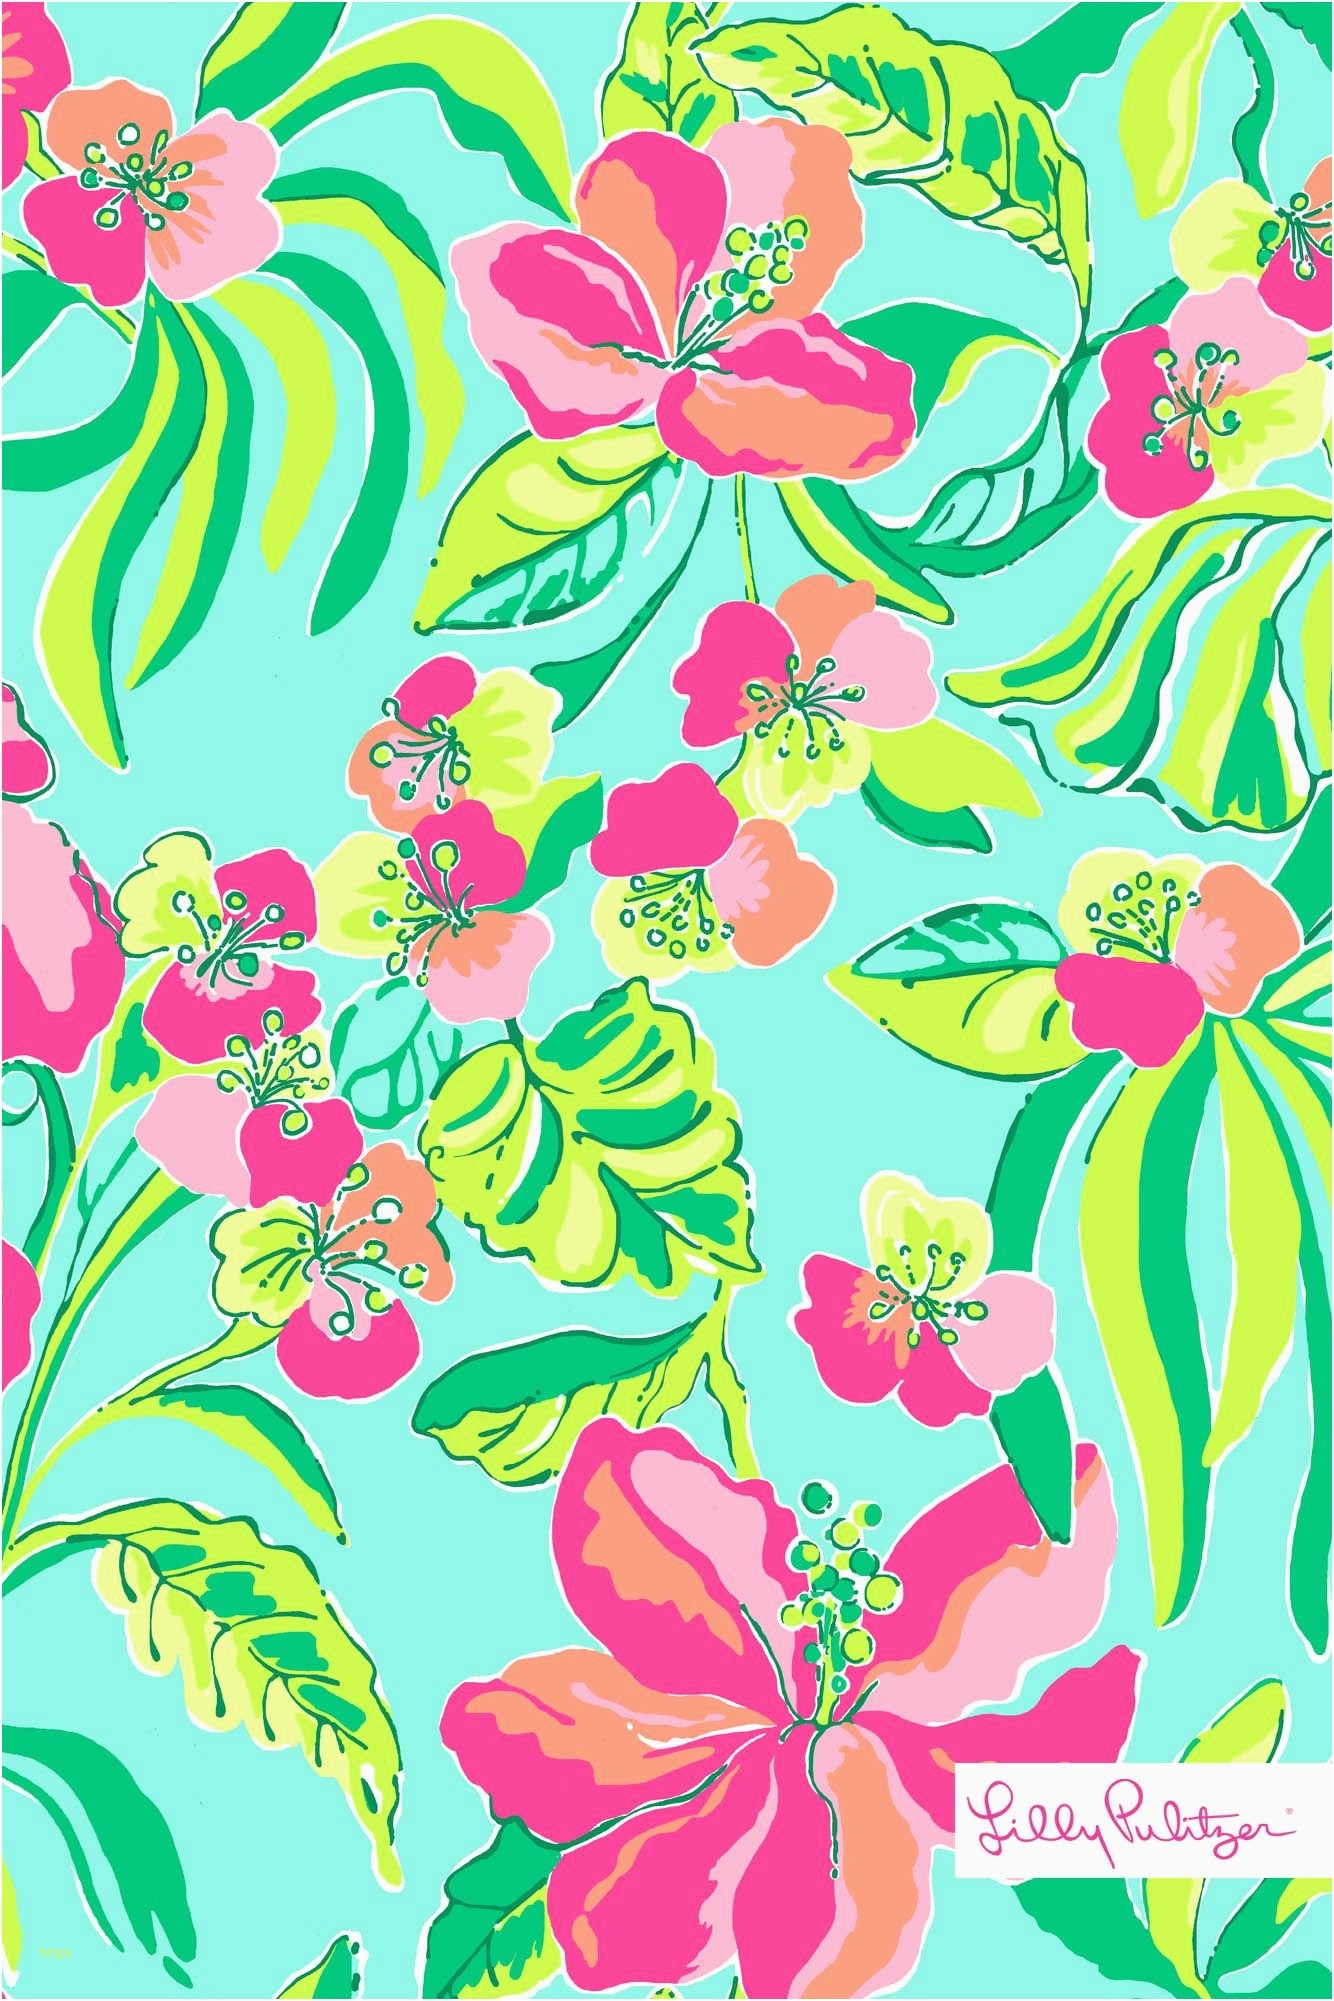 1334x2001 Lilly Pulitzer iPhone Wallpaper Fresh Lily Pulitzer Wallpaper On Pinterest